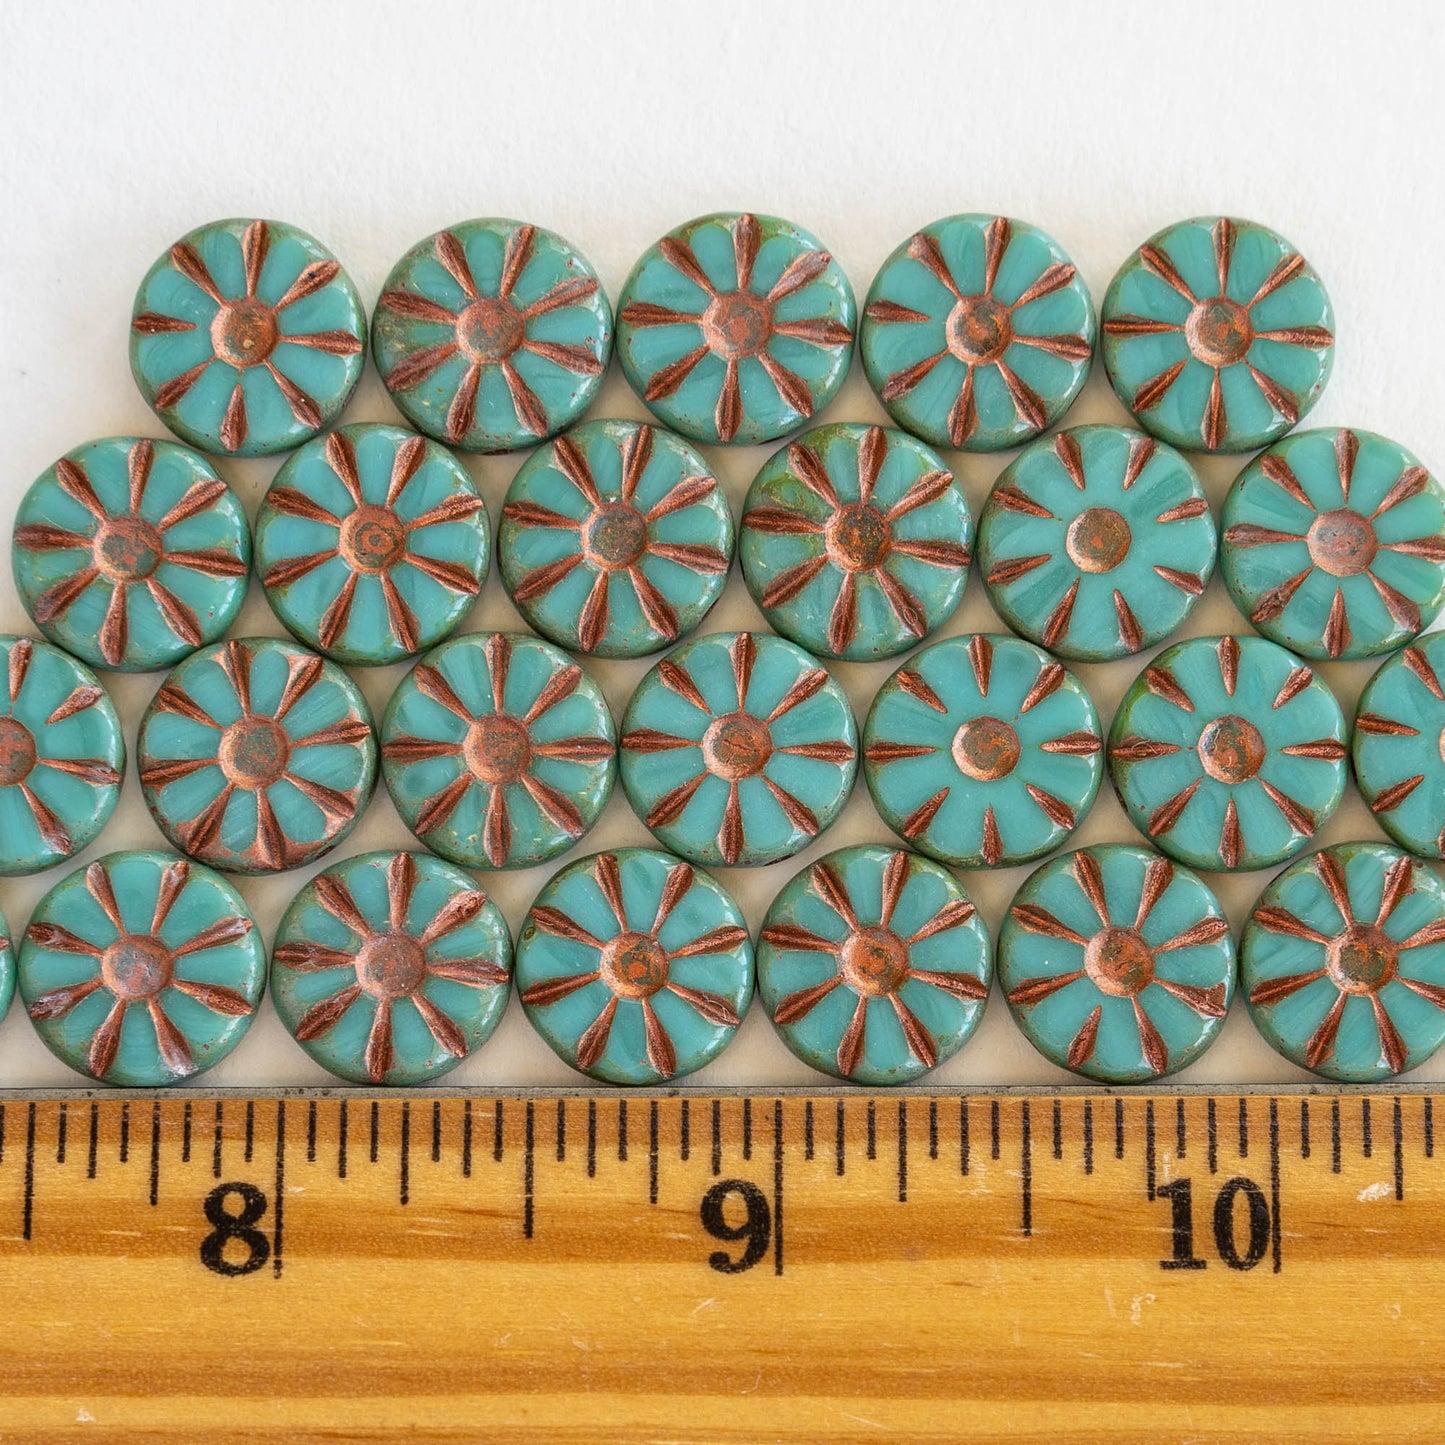 12mm Table Cut Coin Beads - Turquoise With Copper Wash - 10 or 30 Beads